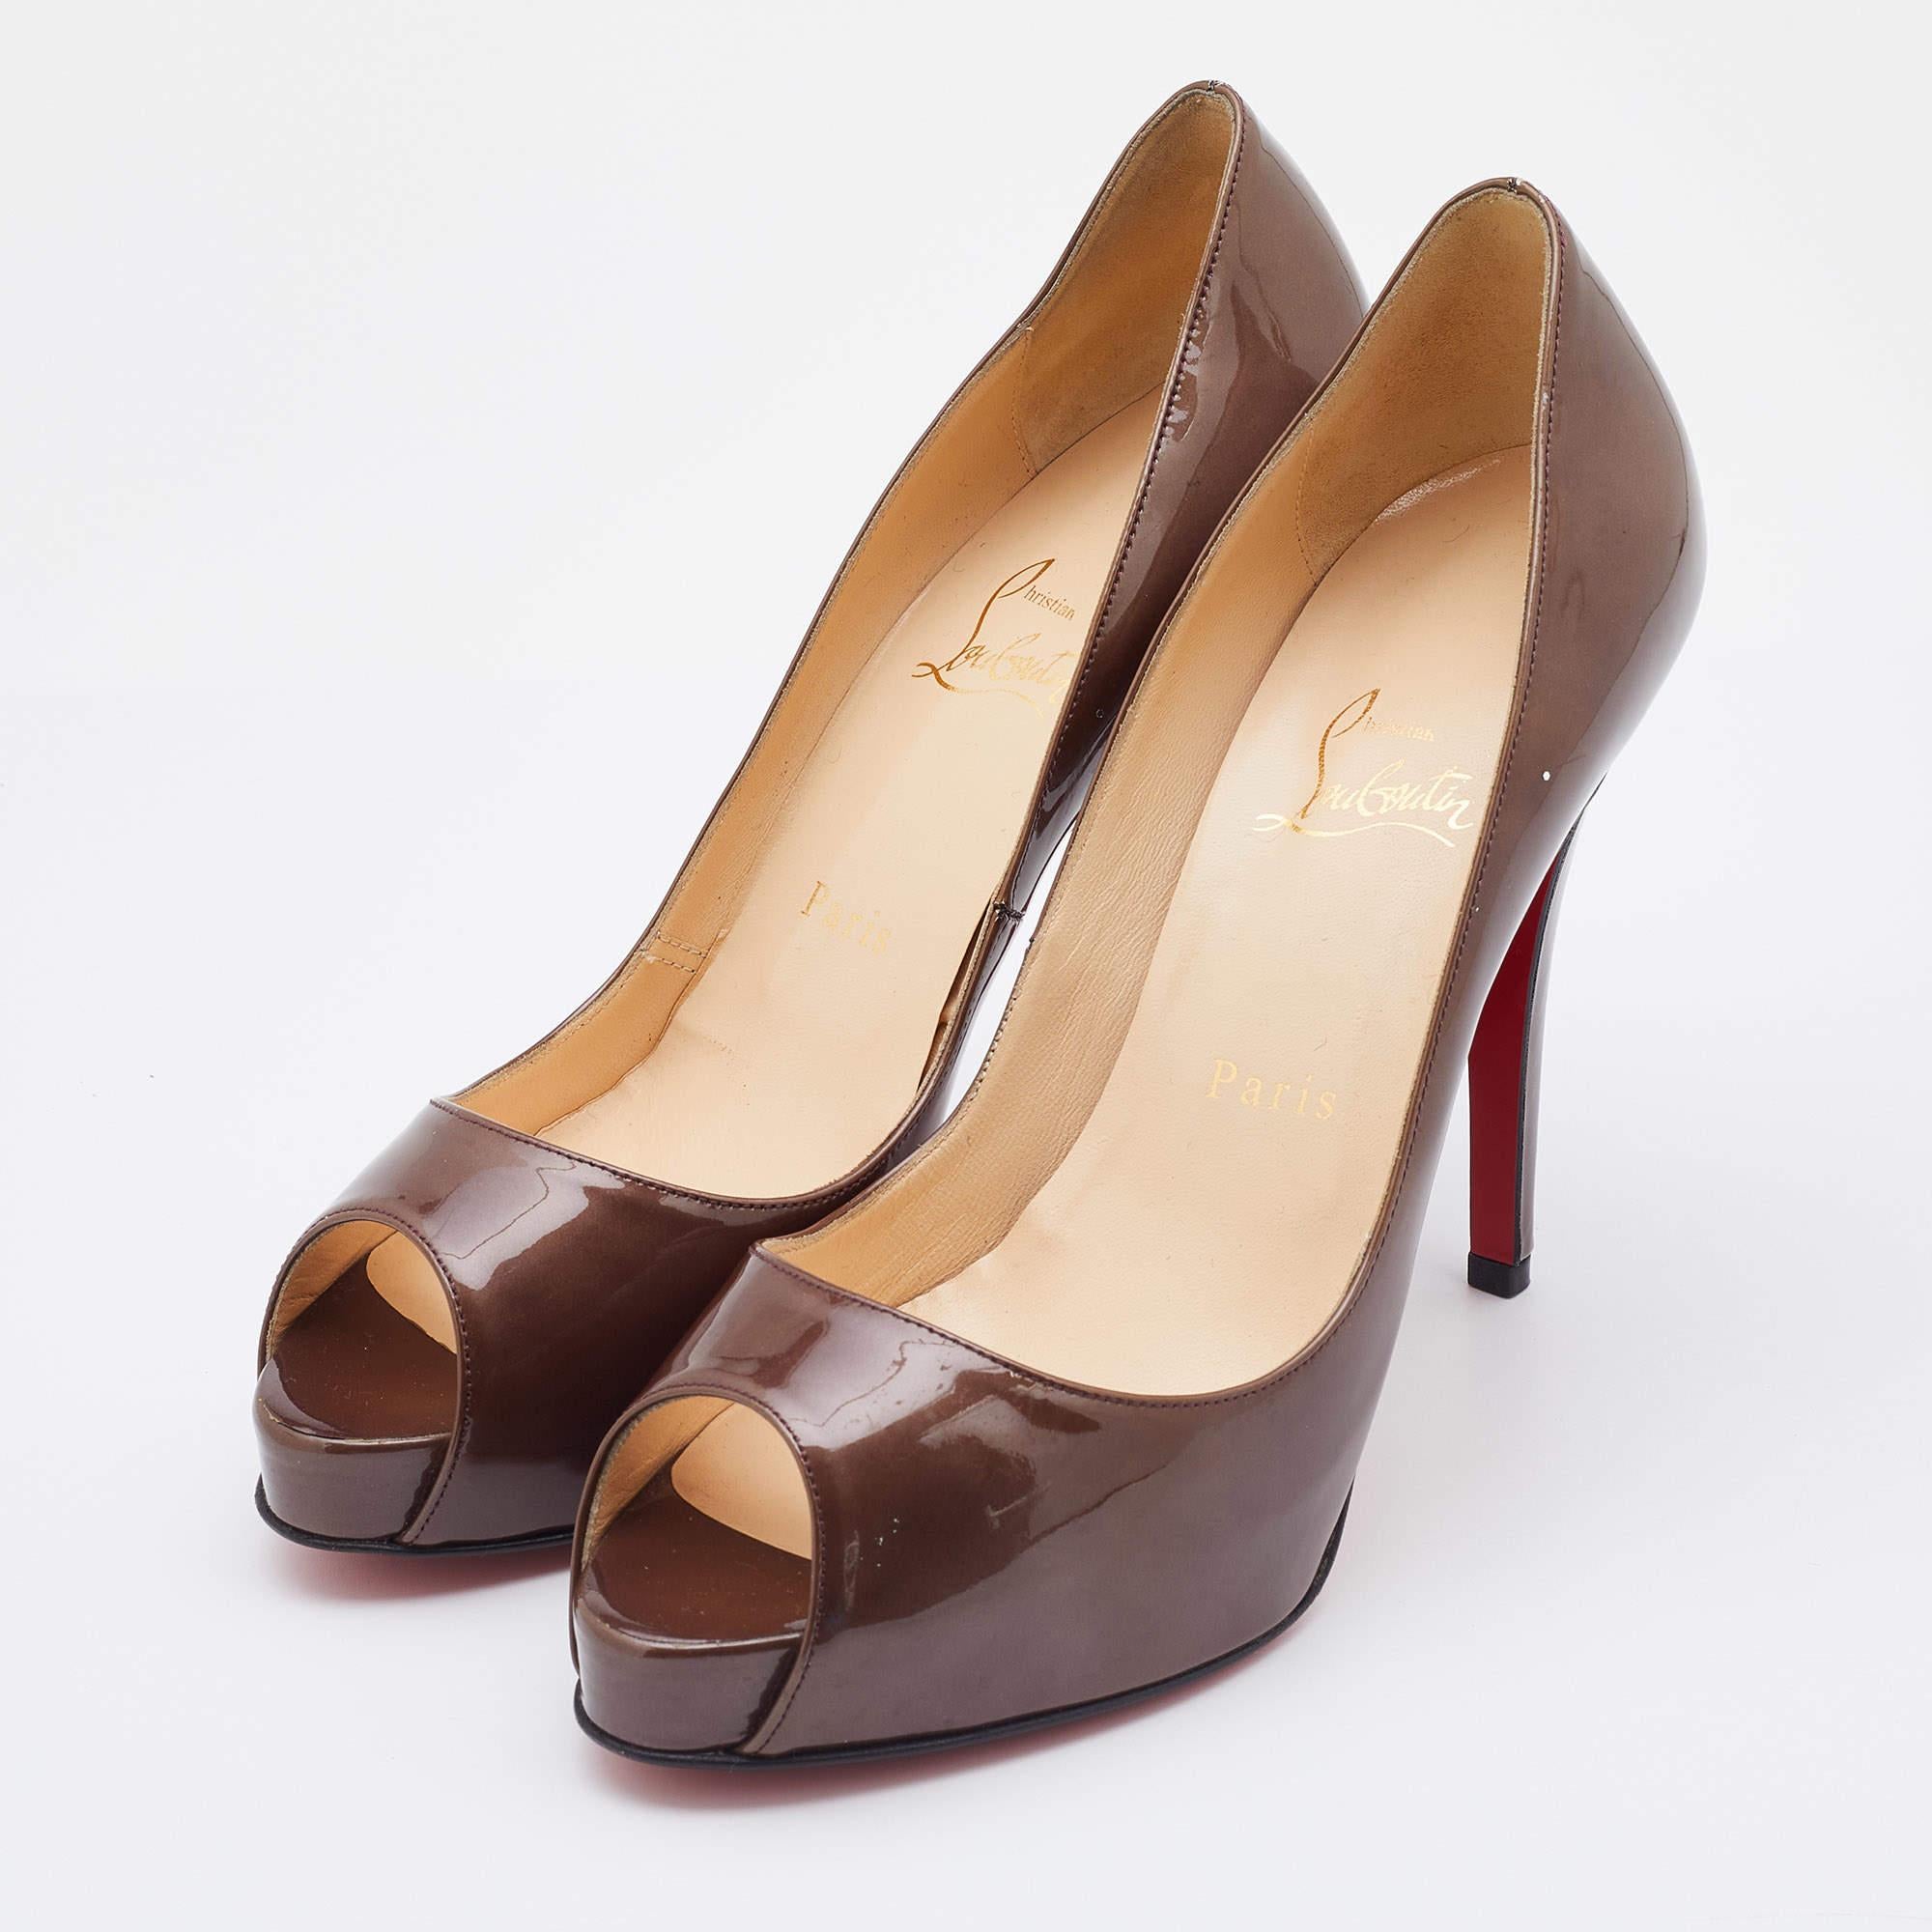 Stride through the day with confidence by adorning this pair of Christian Louboutin pumps. Created from patent leather, its well-designed curves will elegantly outline your feet. The 12cm heels and platforms of these peep-toe shoes will take your